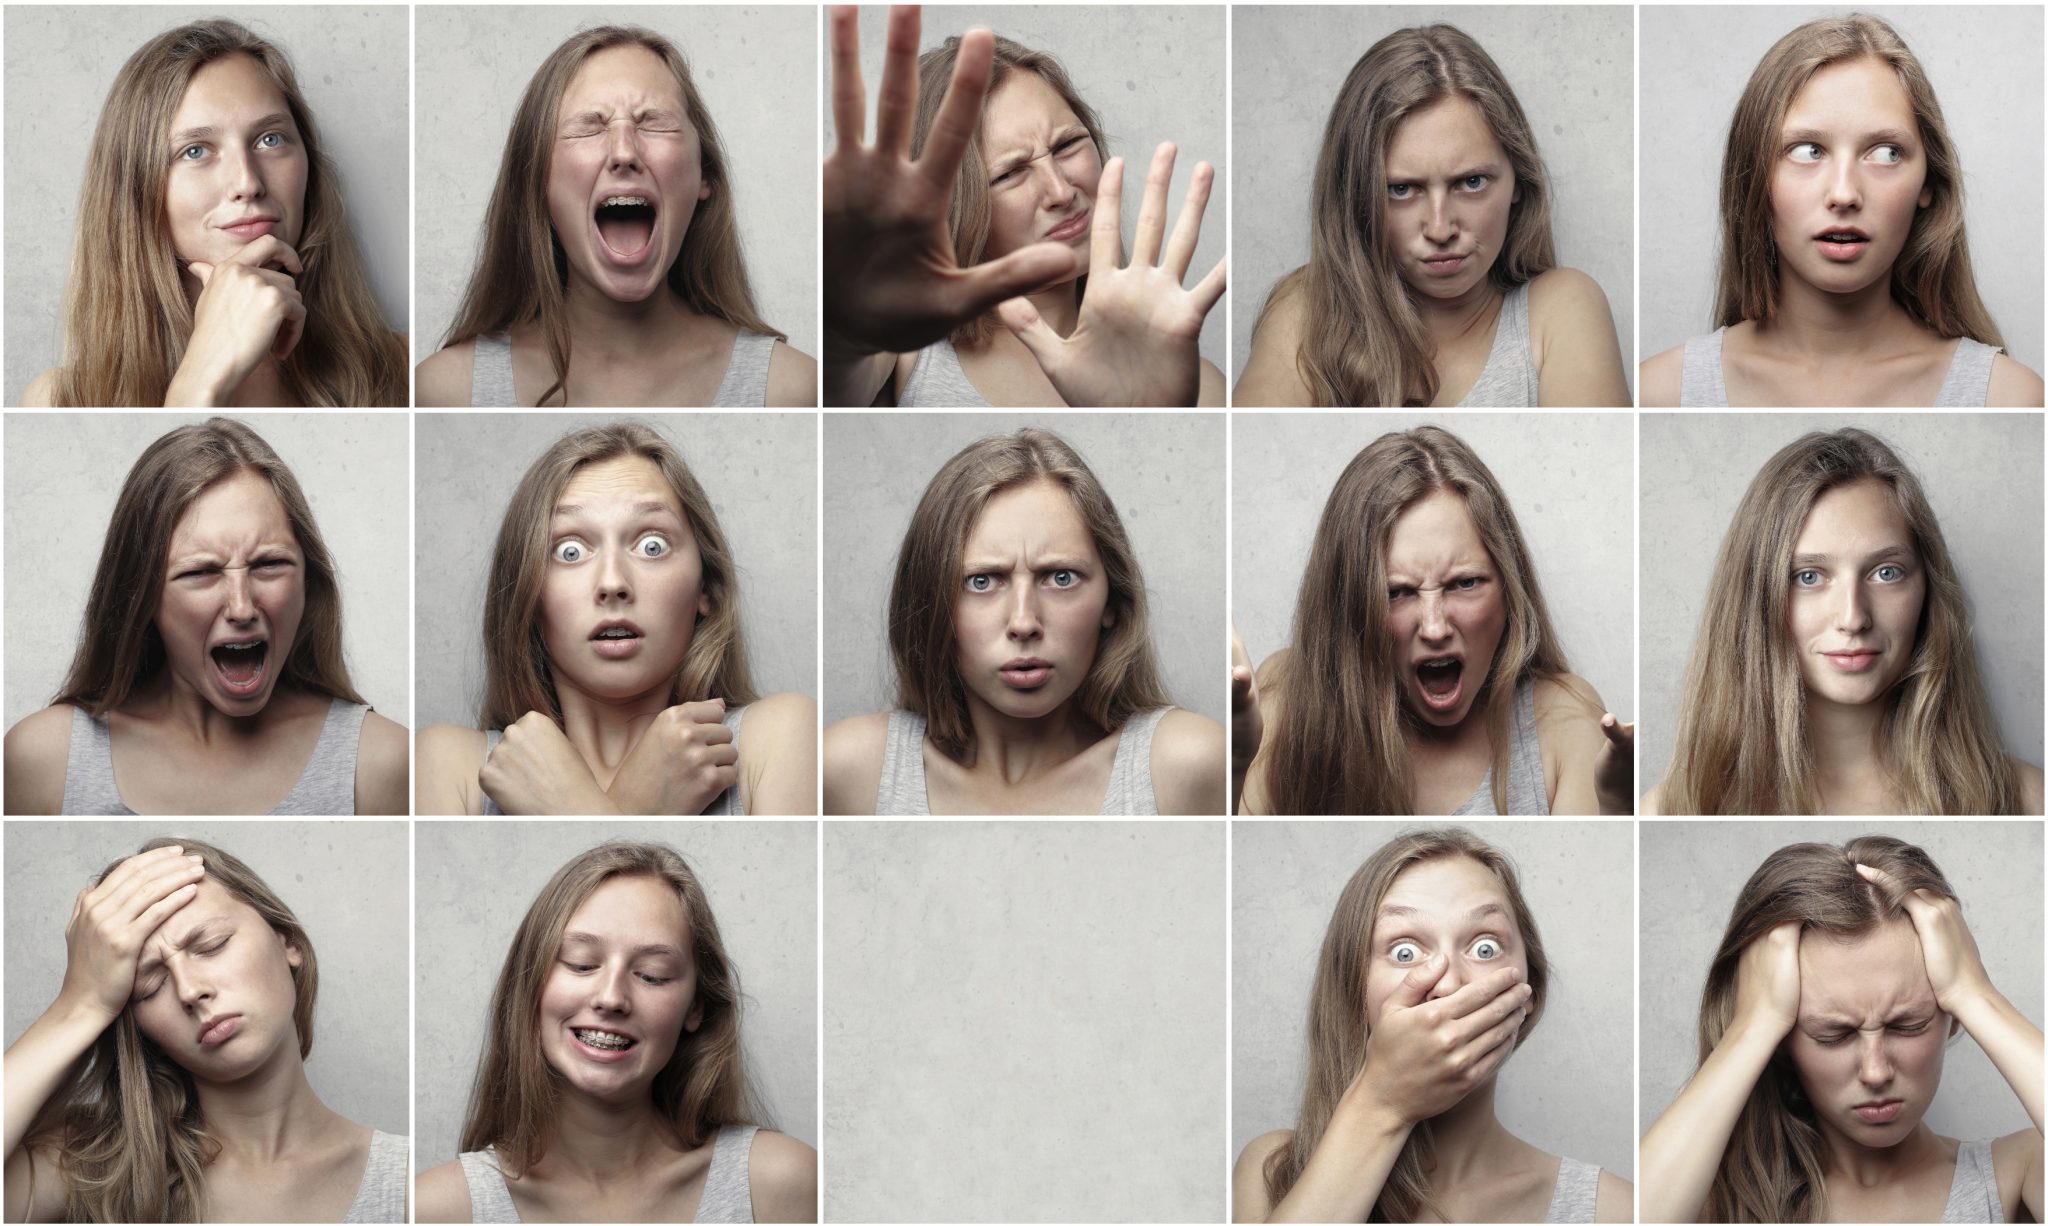 Collage of woman's reactions